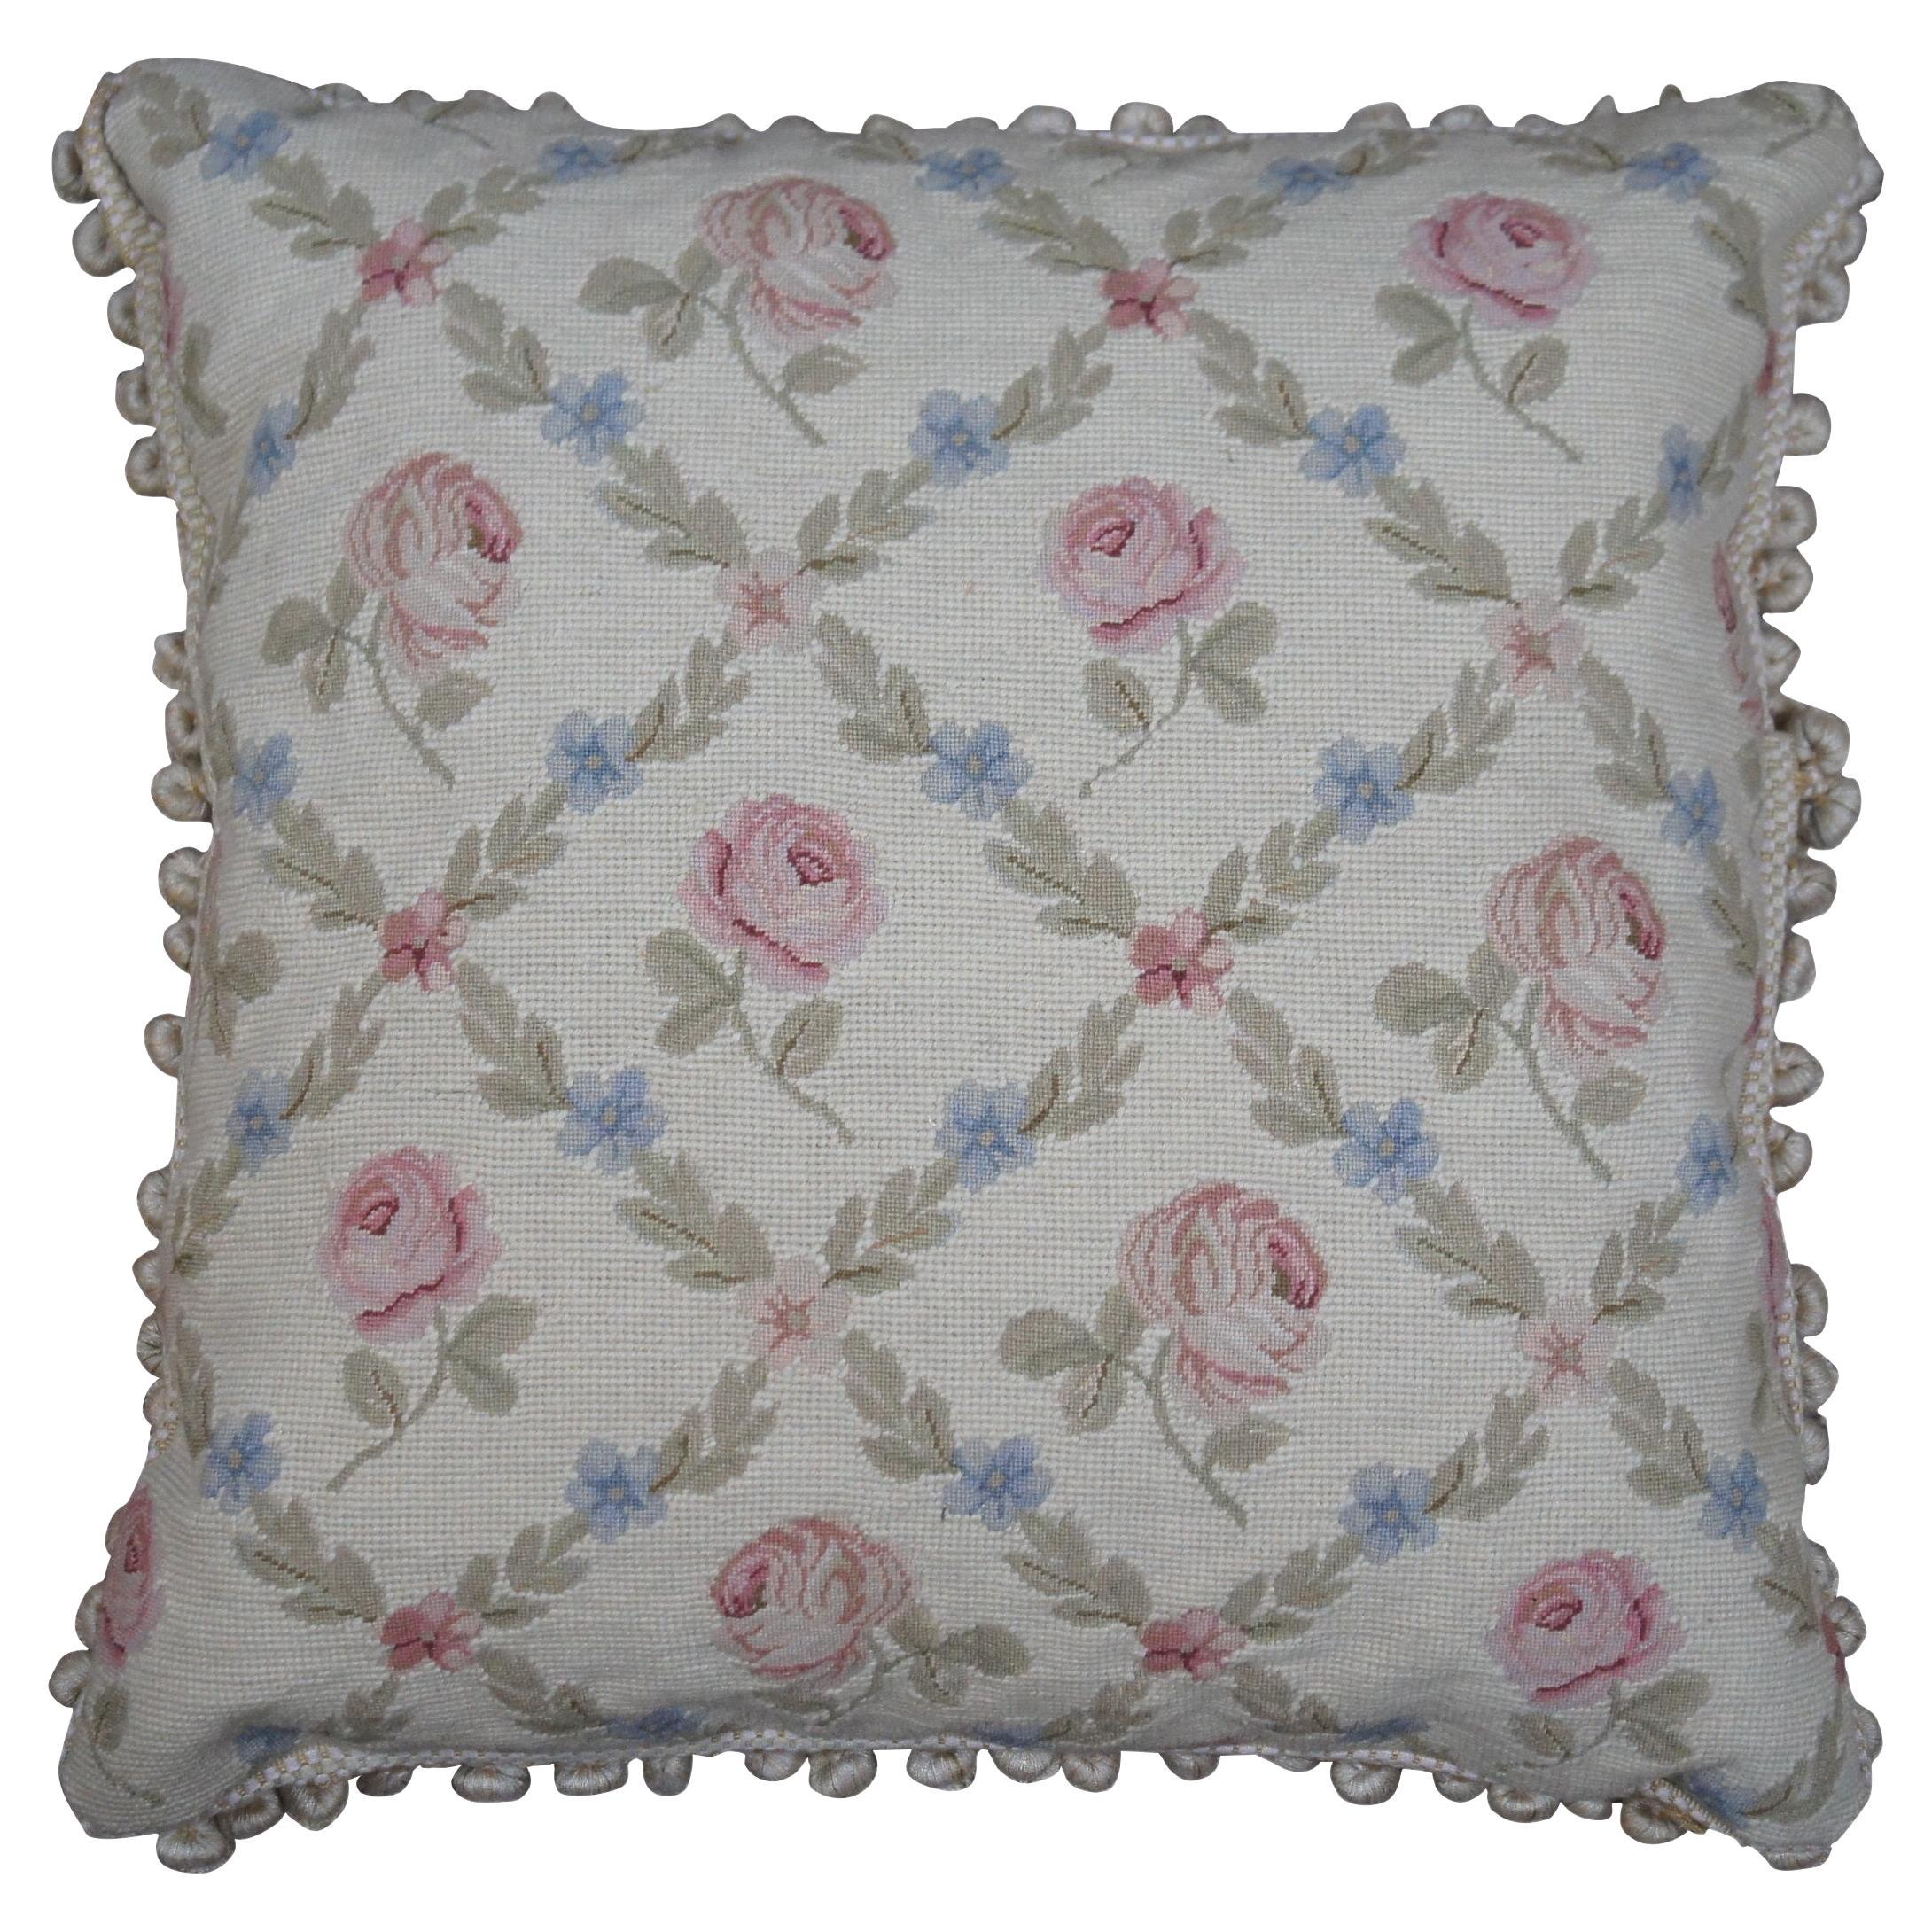 Down Filled Floral Crossed Roses Needlepoint Tassel Lumbar Throw Pillow 22"